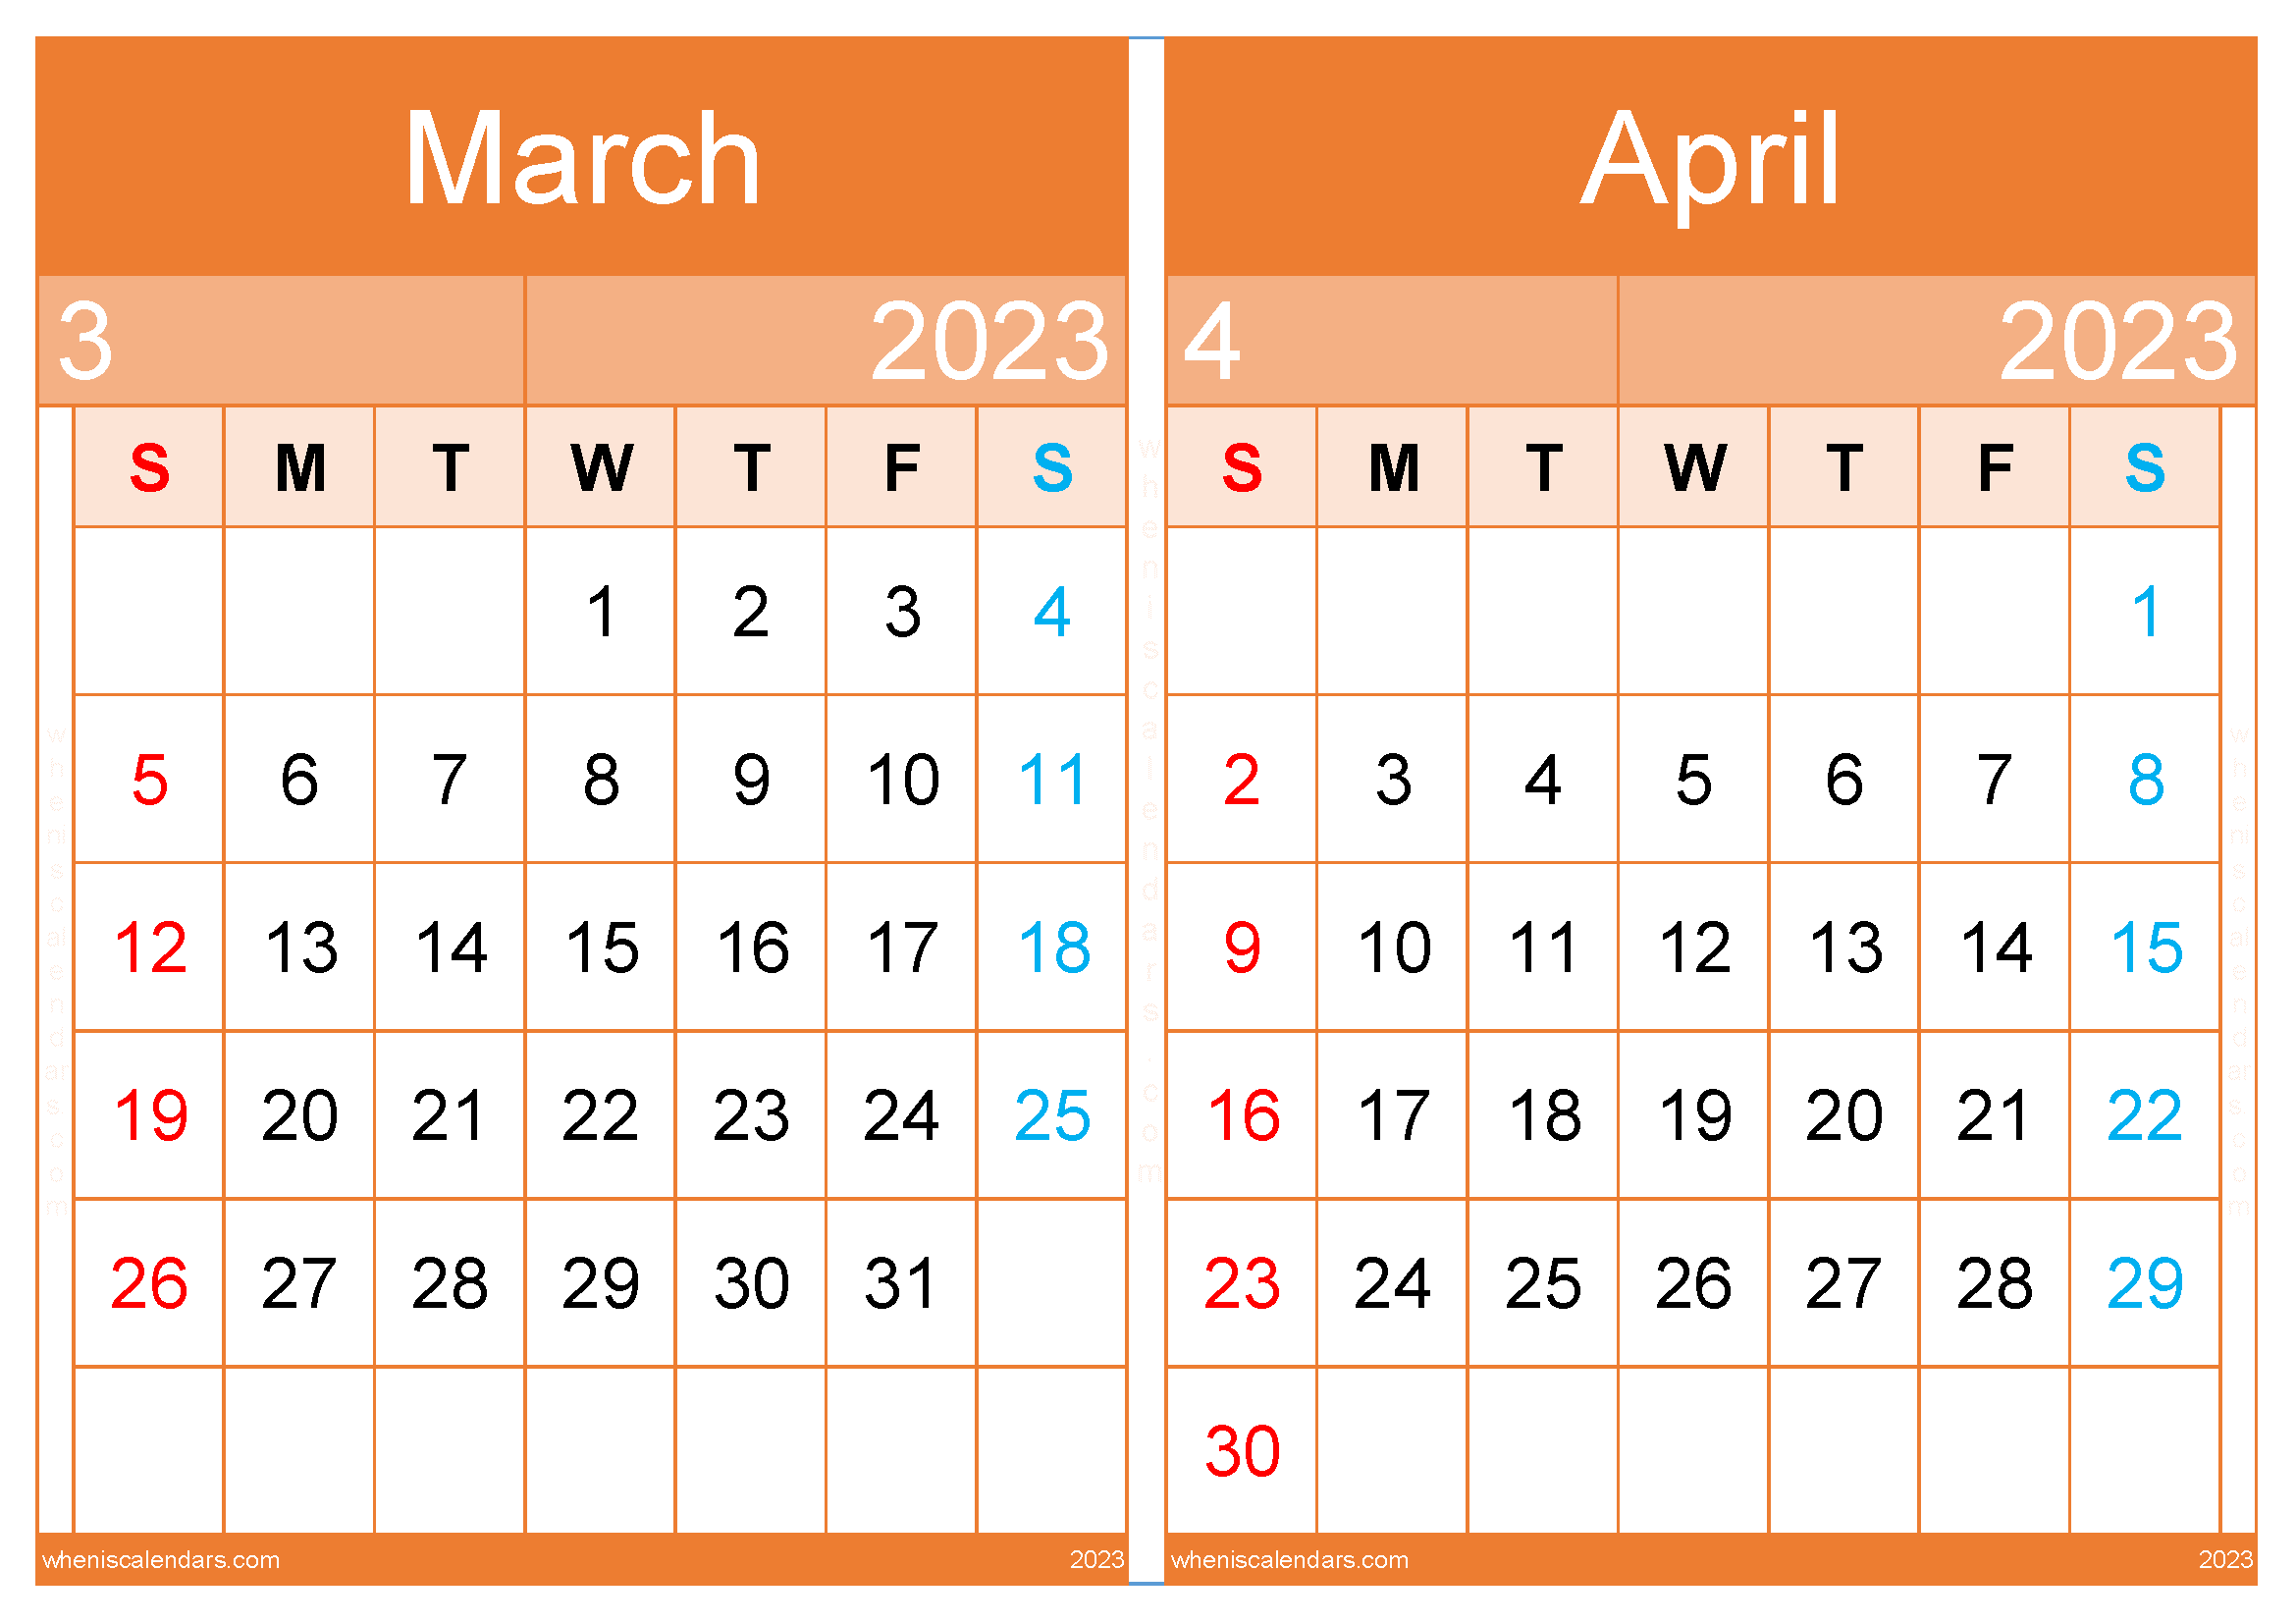 March and April Calendar 2023 Template (MA2312)